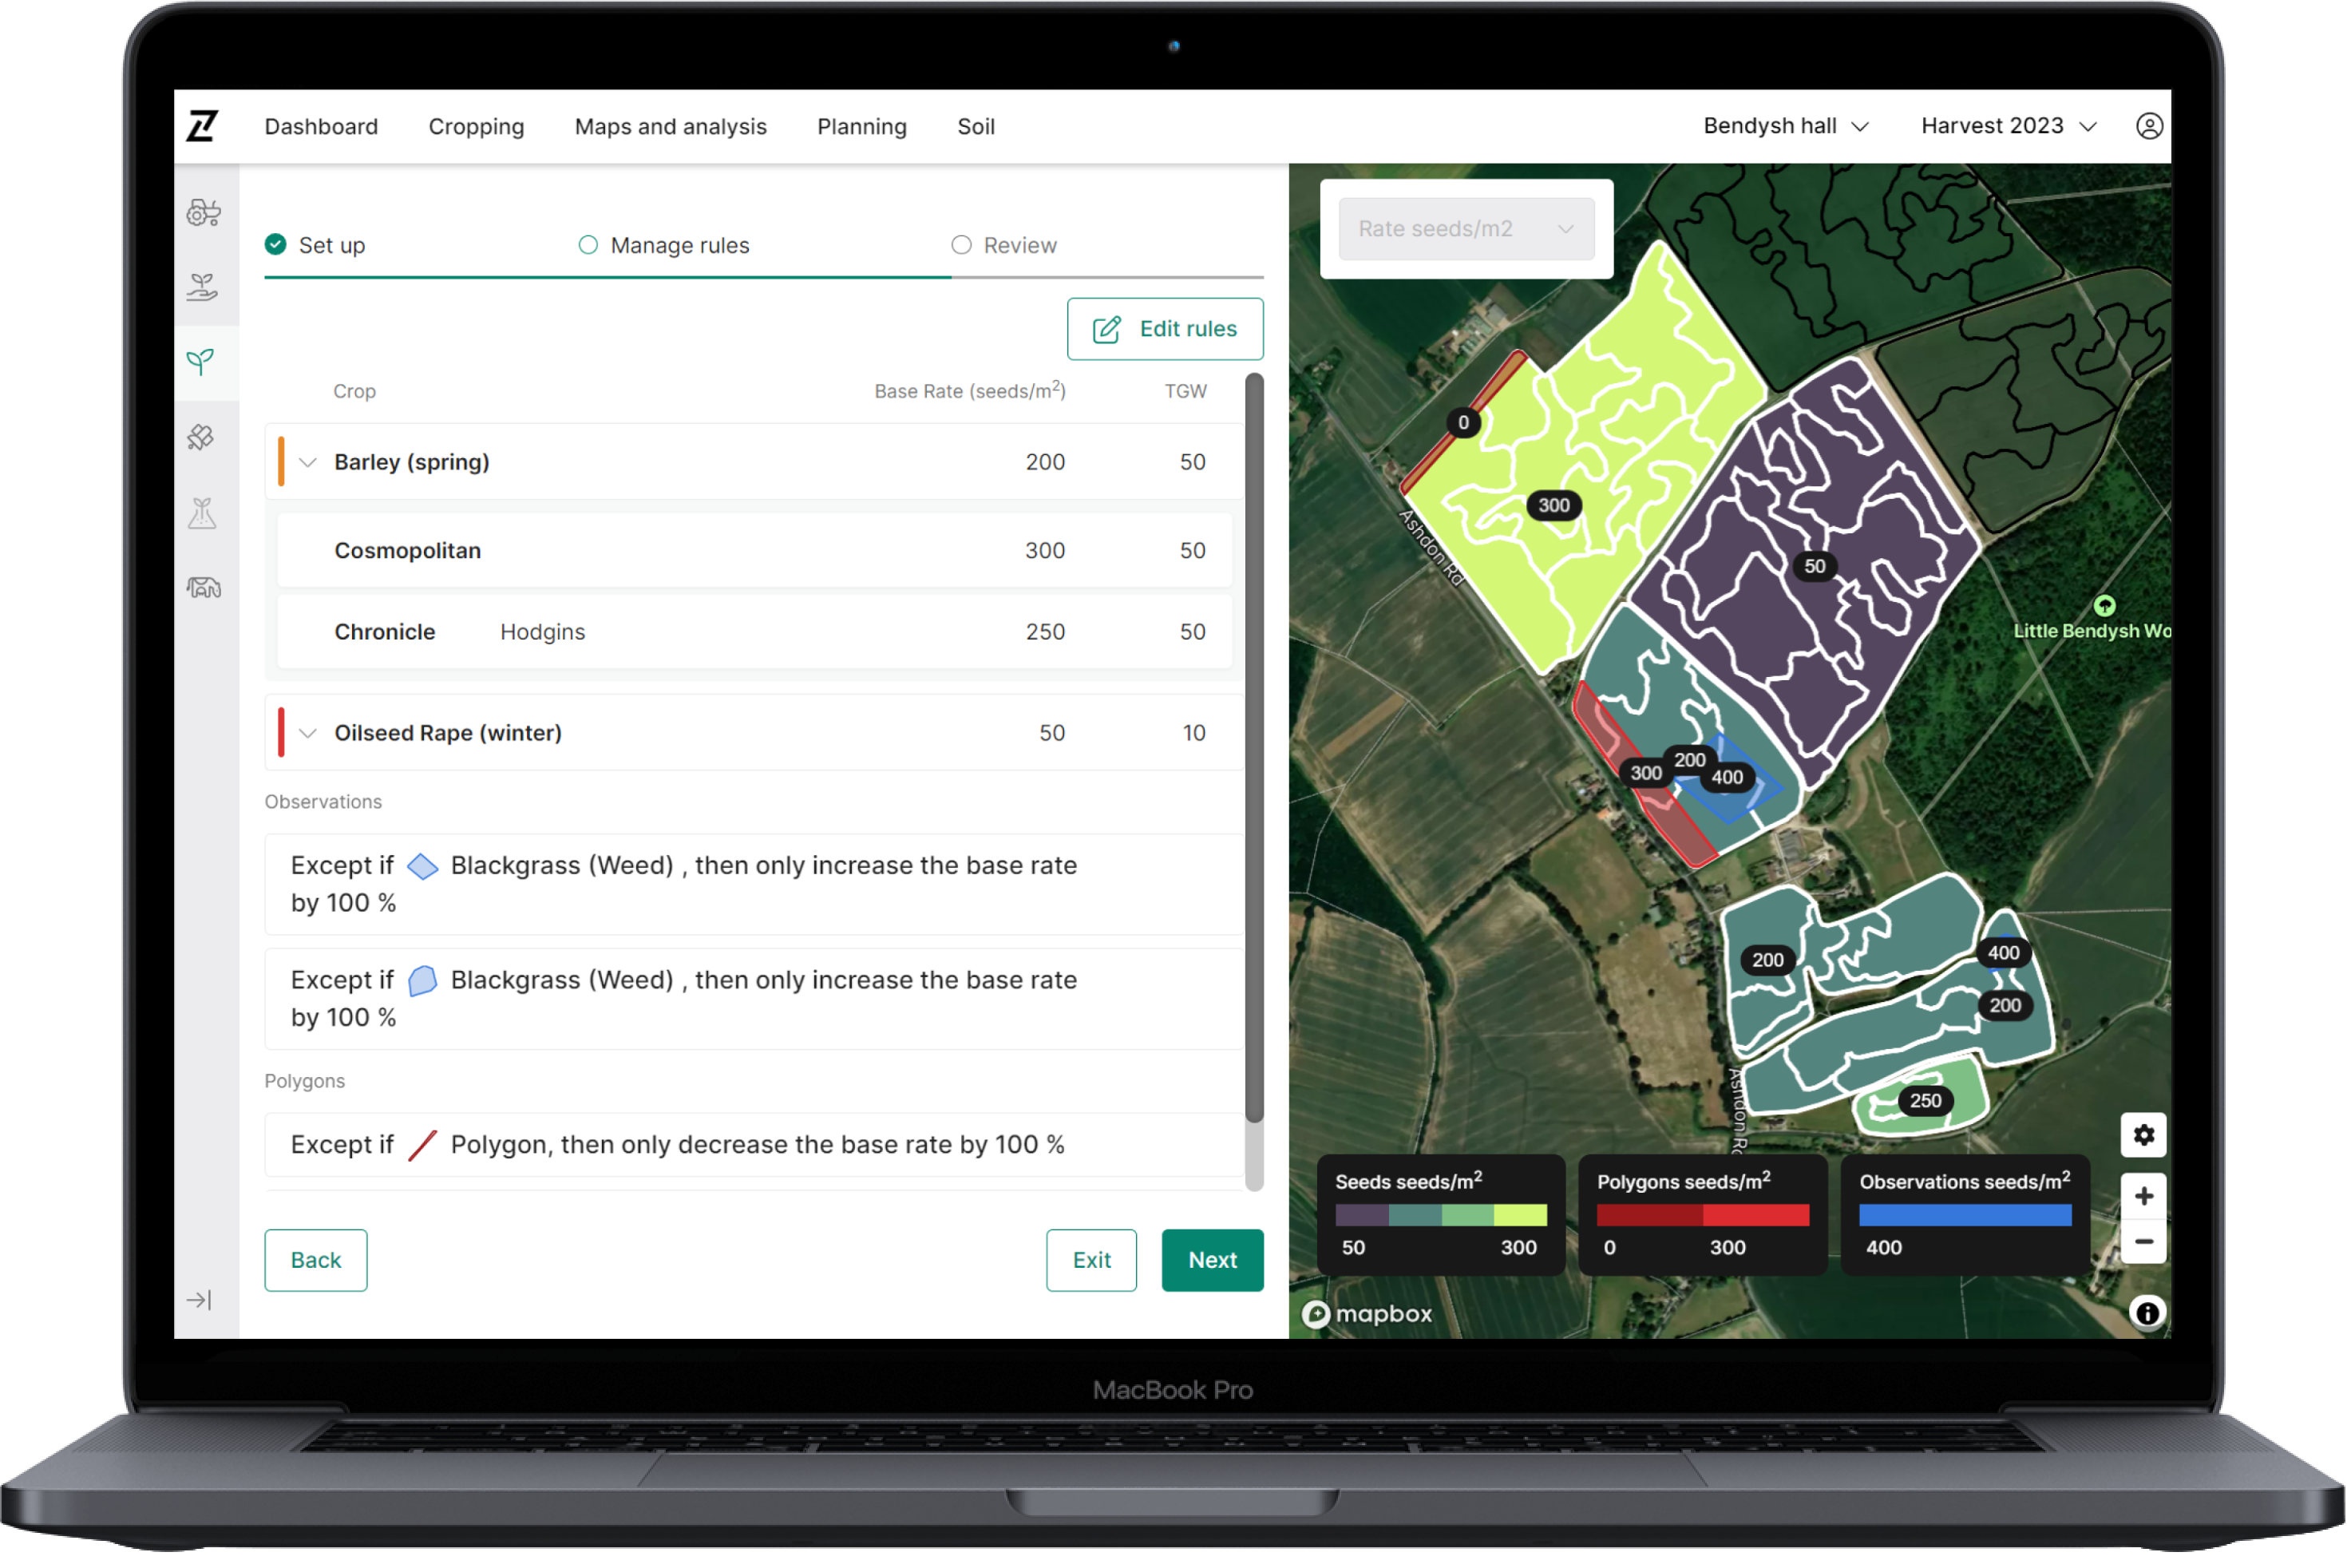 The new Contour Whole Field Seed Planning tool is now available, enabling all farmers to experience the benefits of digital seed planning and knowing the precise amount of seed they need to order